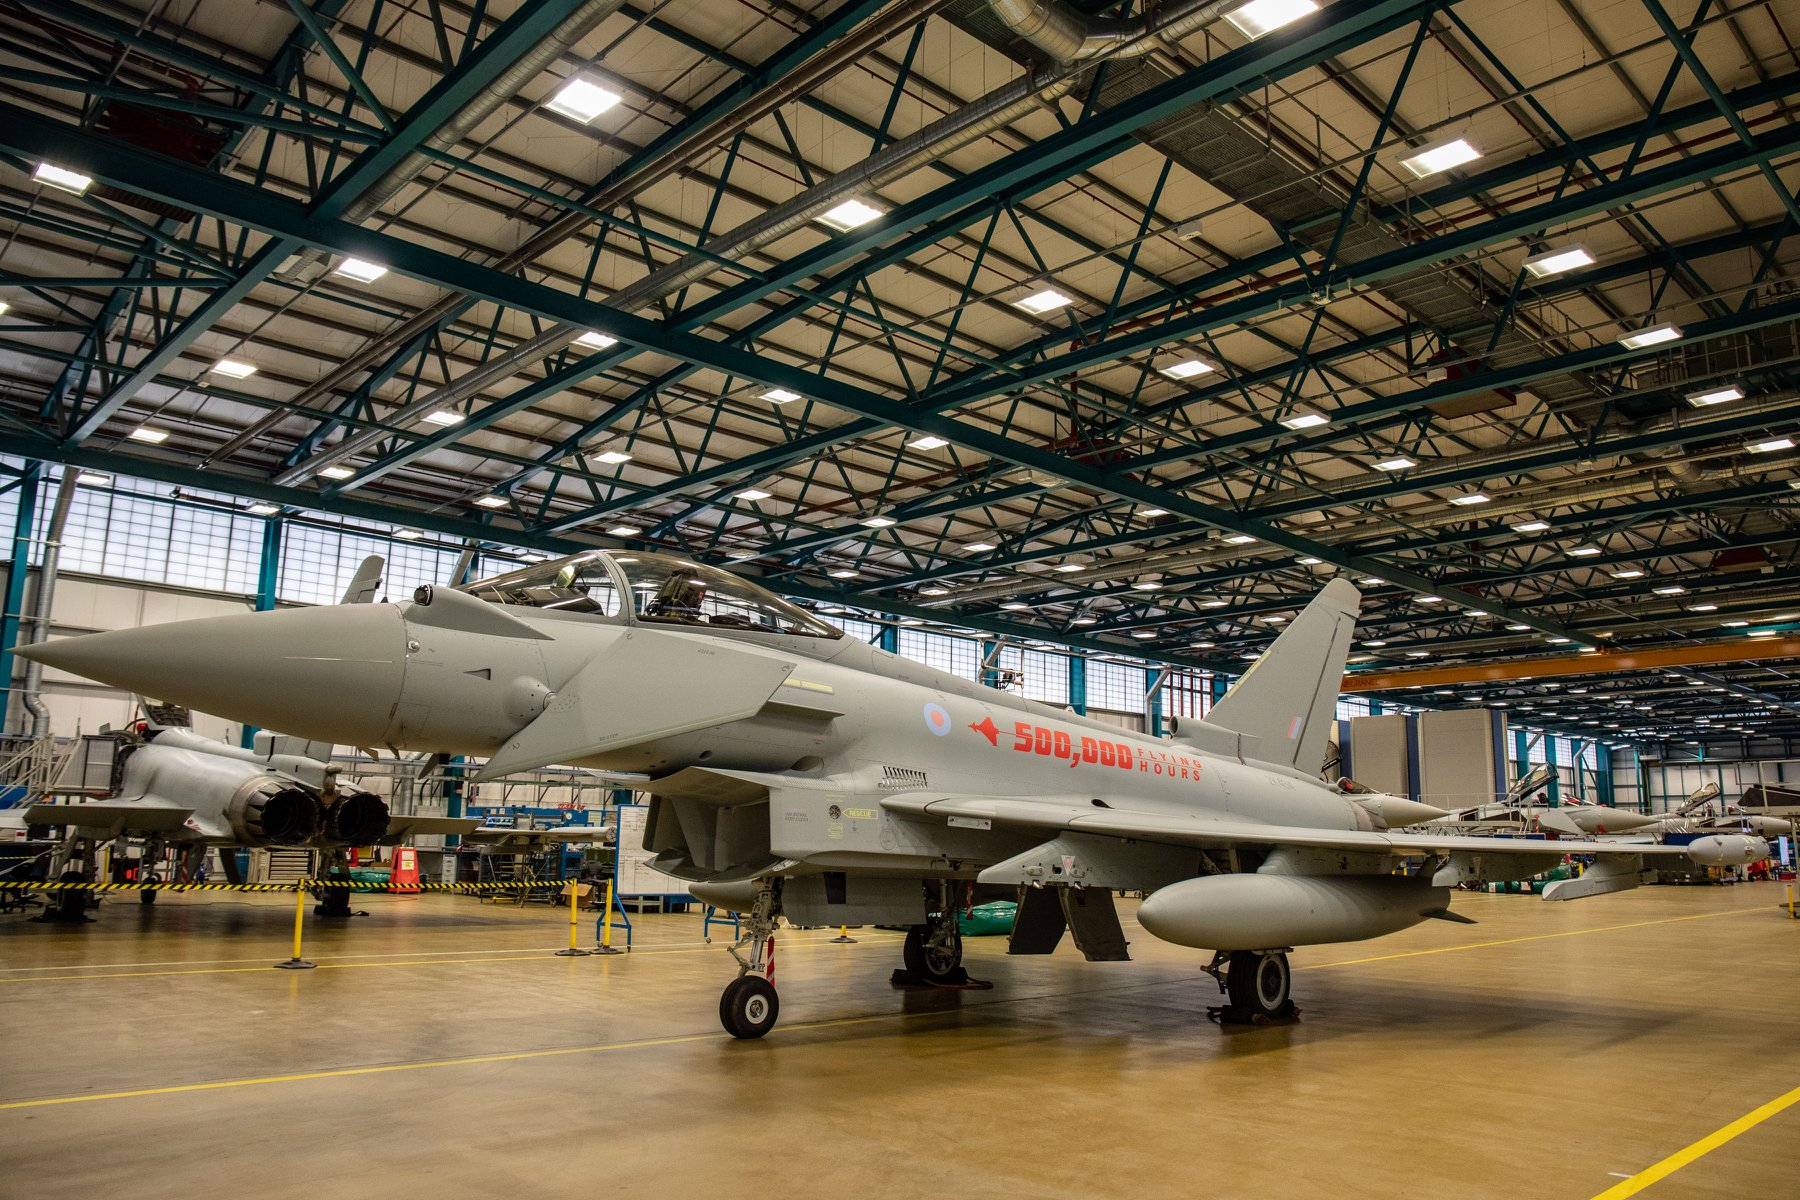 Typhoons have been operated by the RAF since 2007.